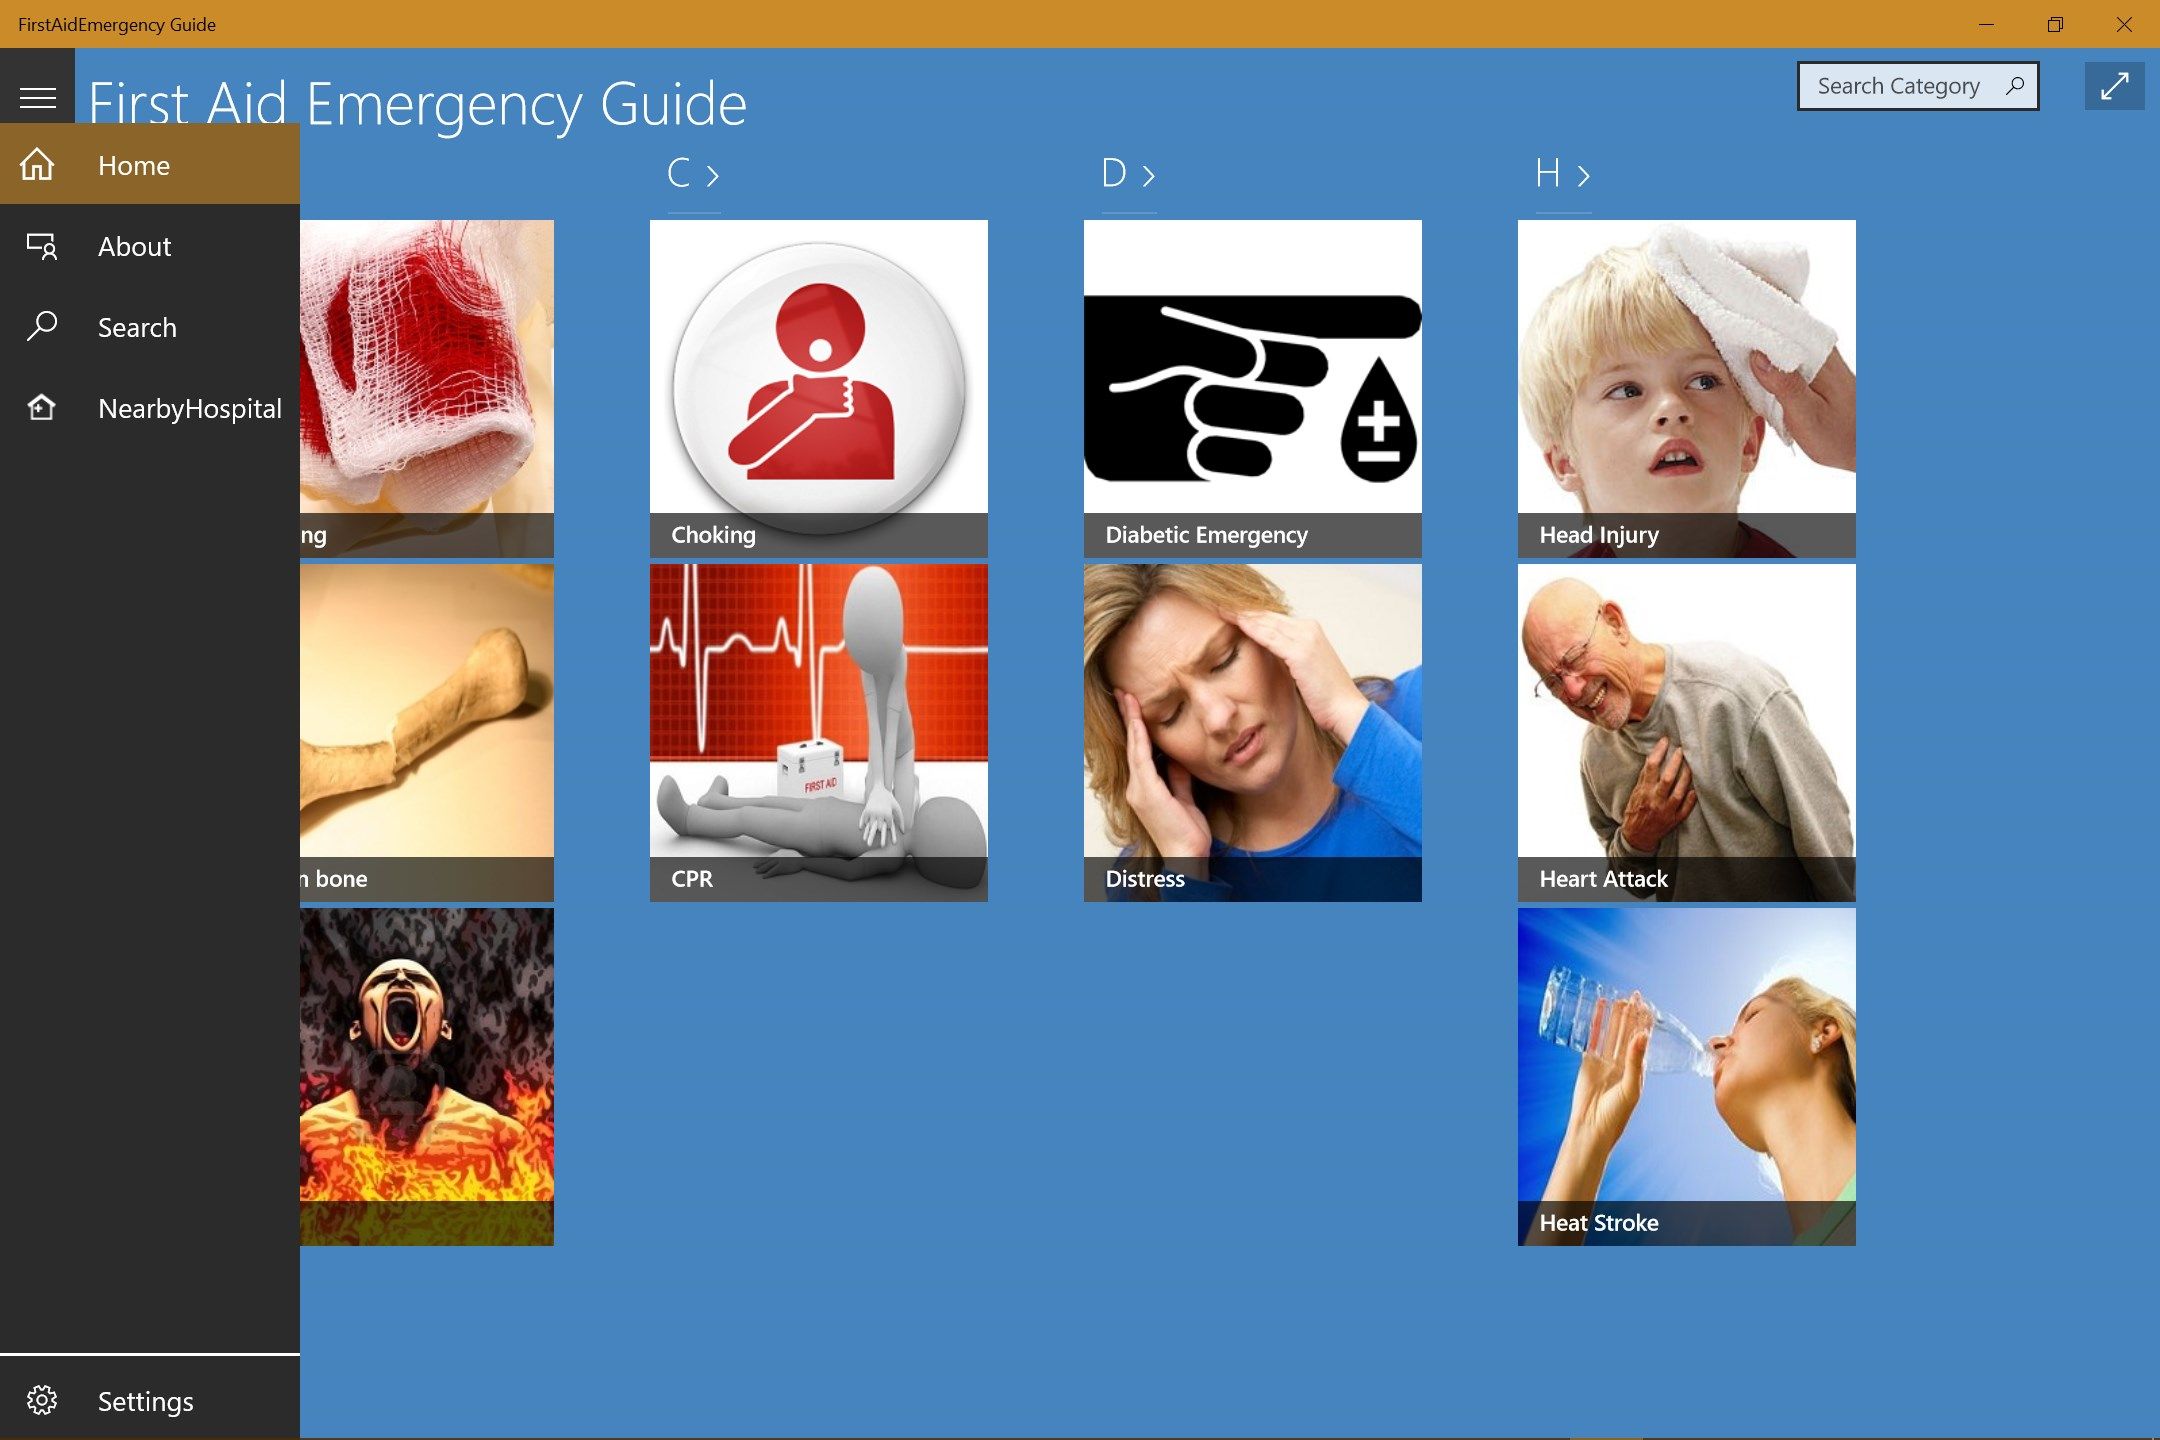 FirstAidEmergency Guide